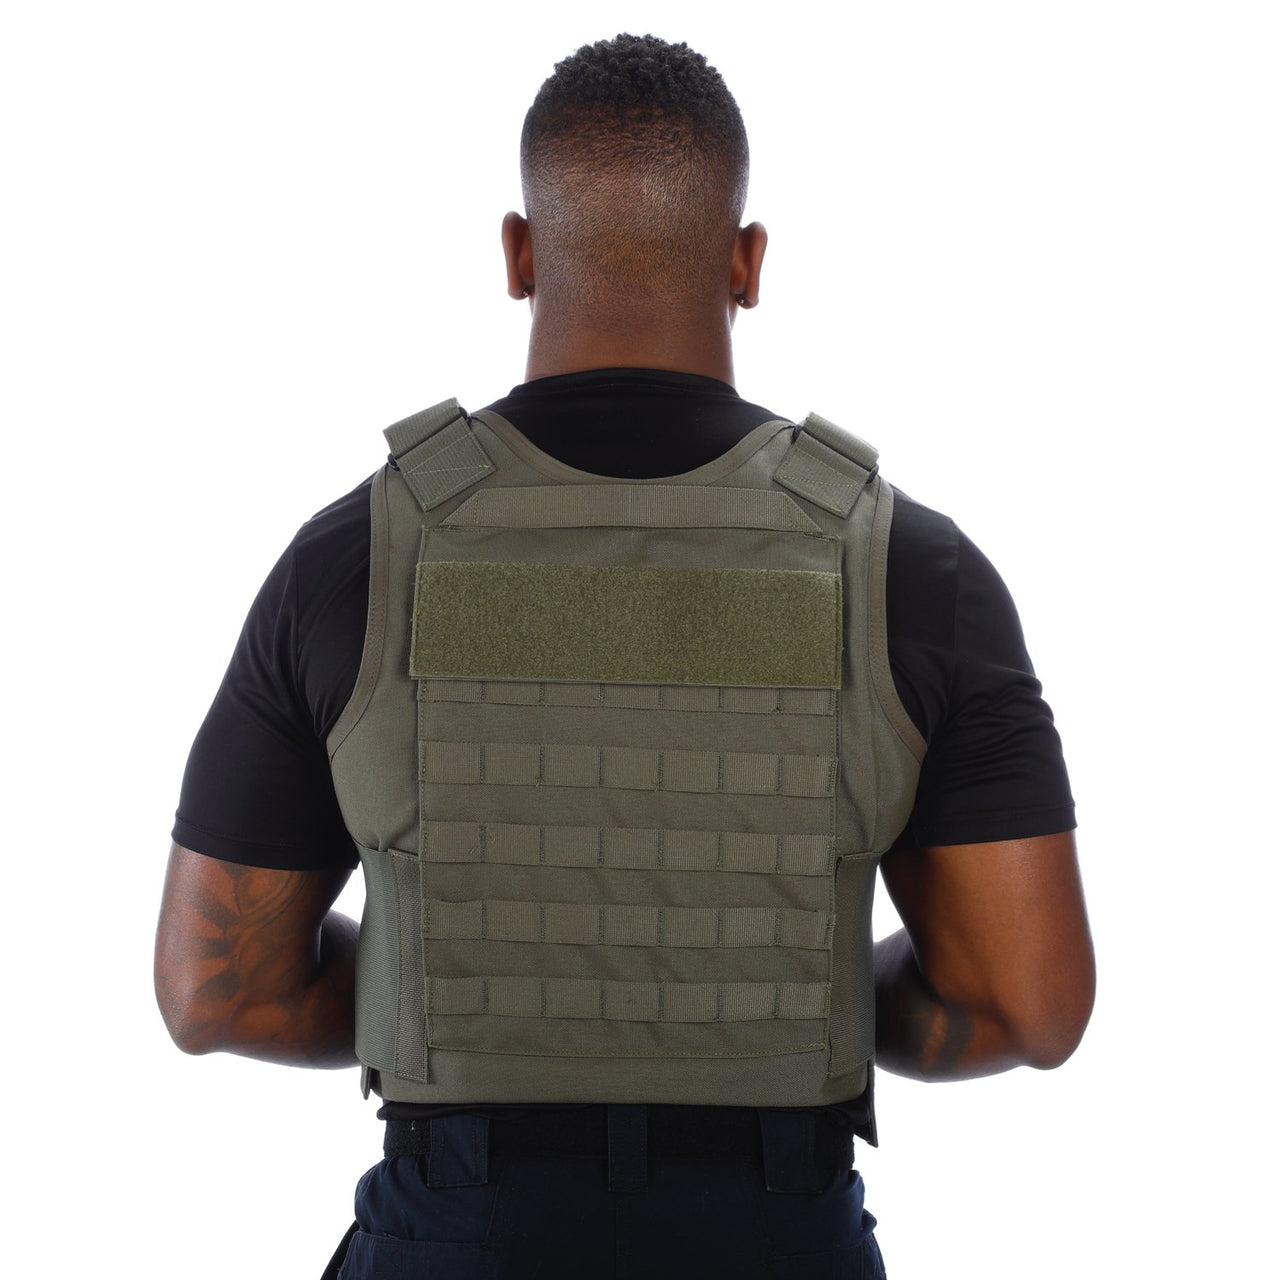 The back view of a man wearing a Body Armor Direct All Star Tactical Enhanced Multi-Threat Vest.